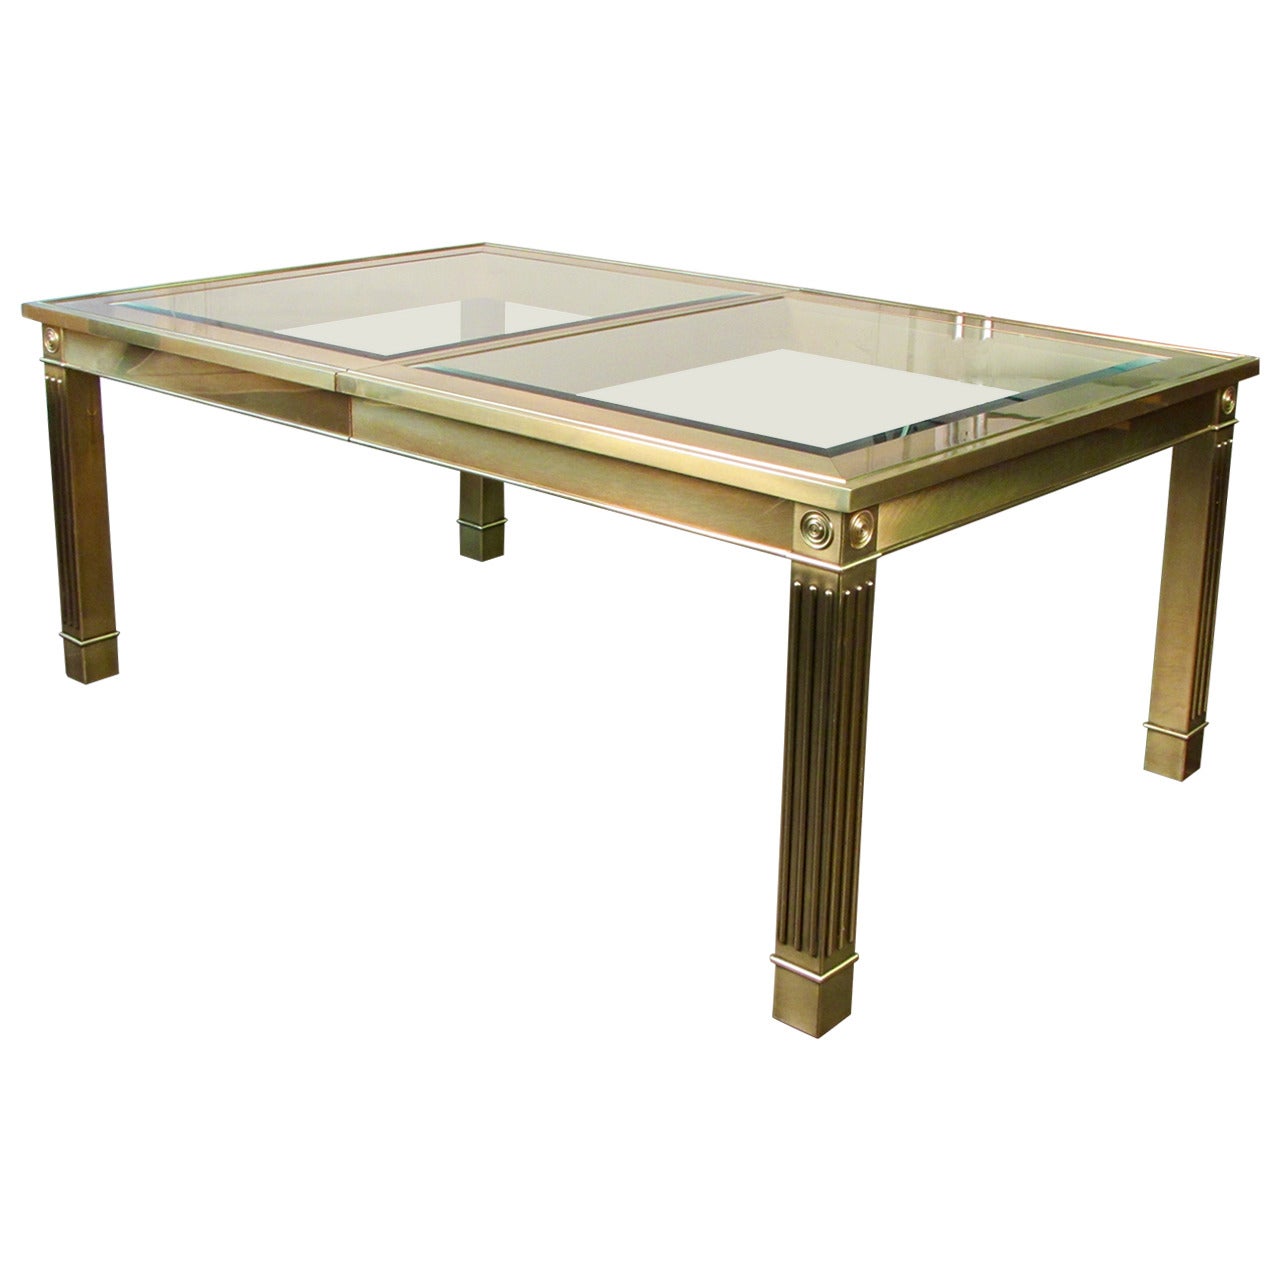 Striking Brass and Glass Dining Table with Leaf by Mastercraft, 1970s